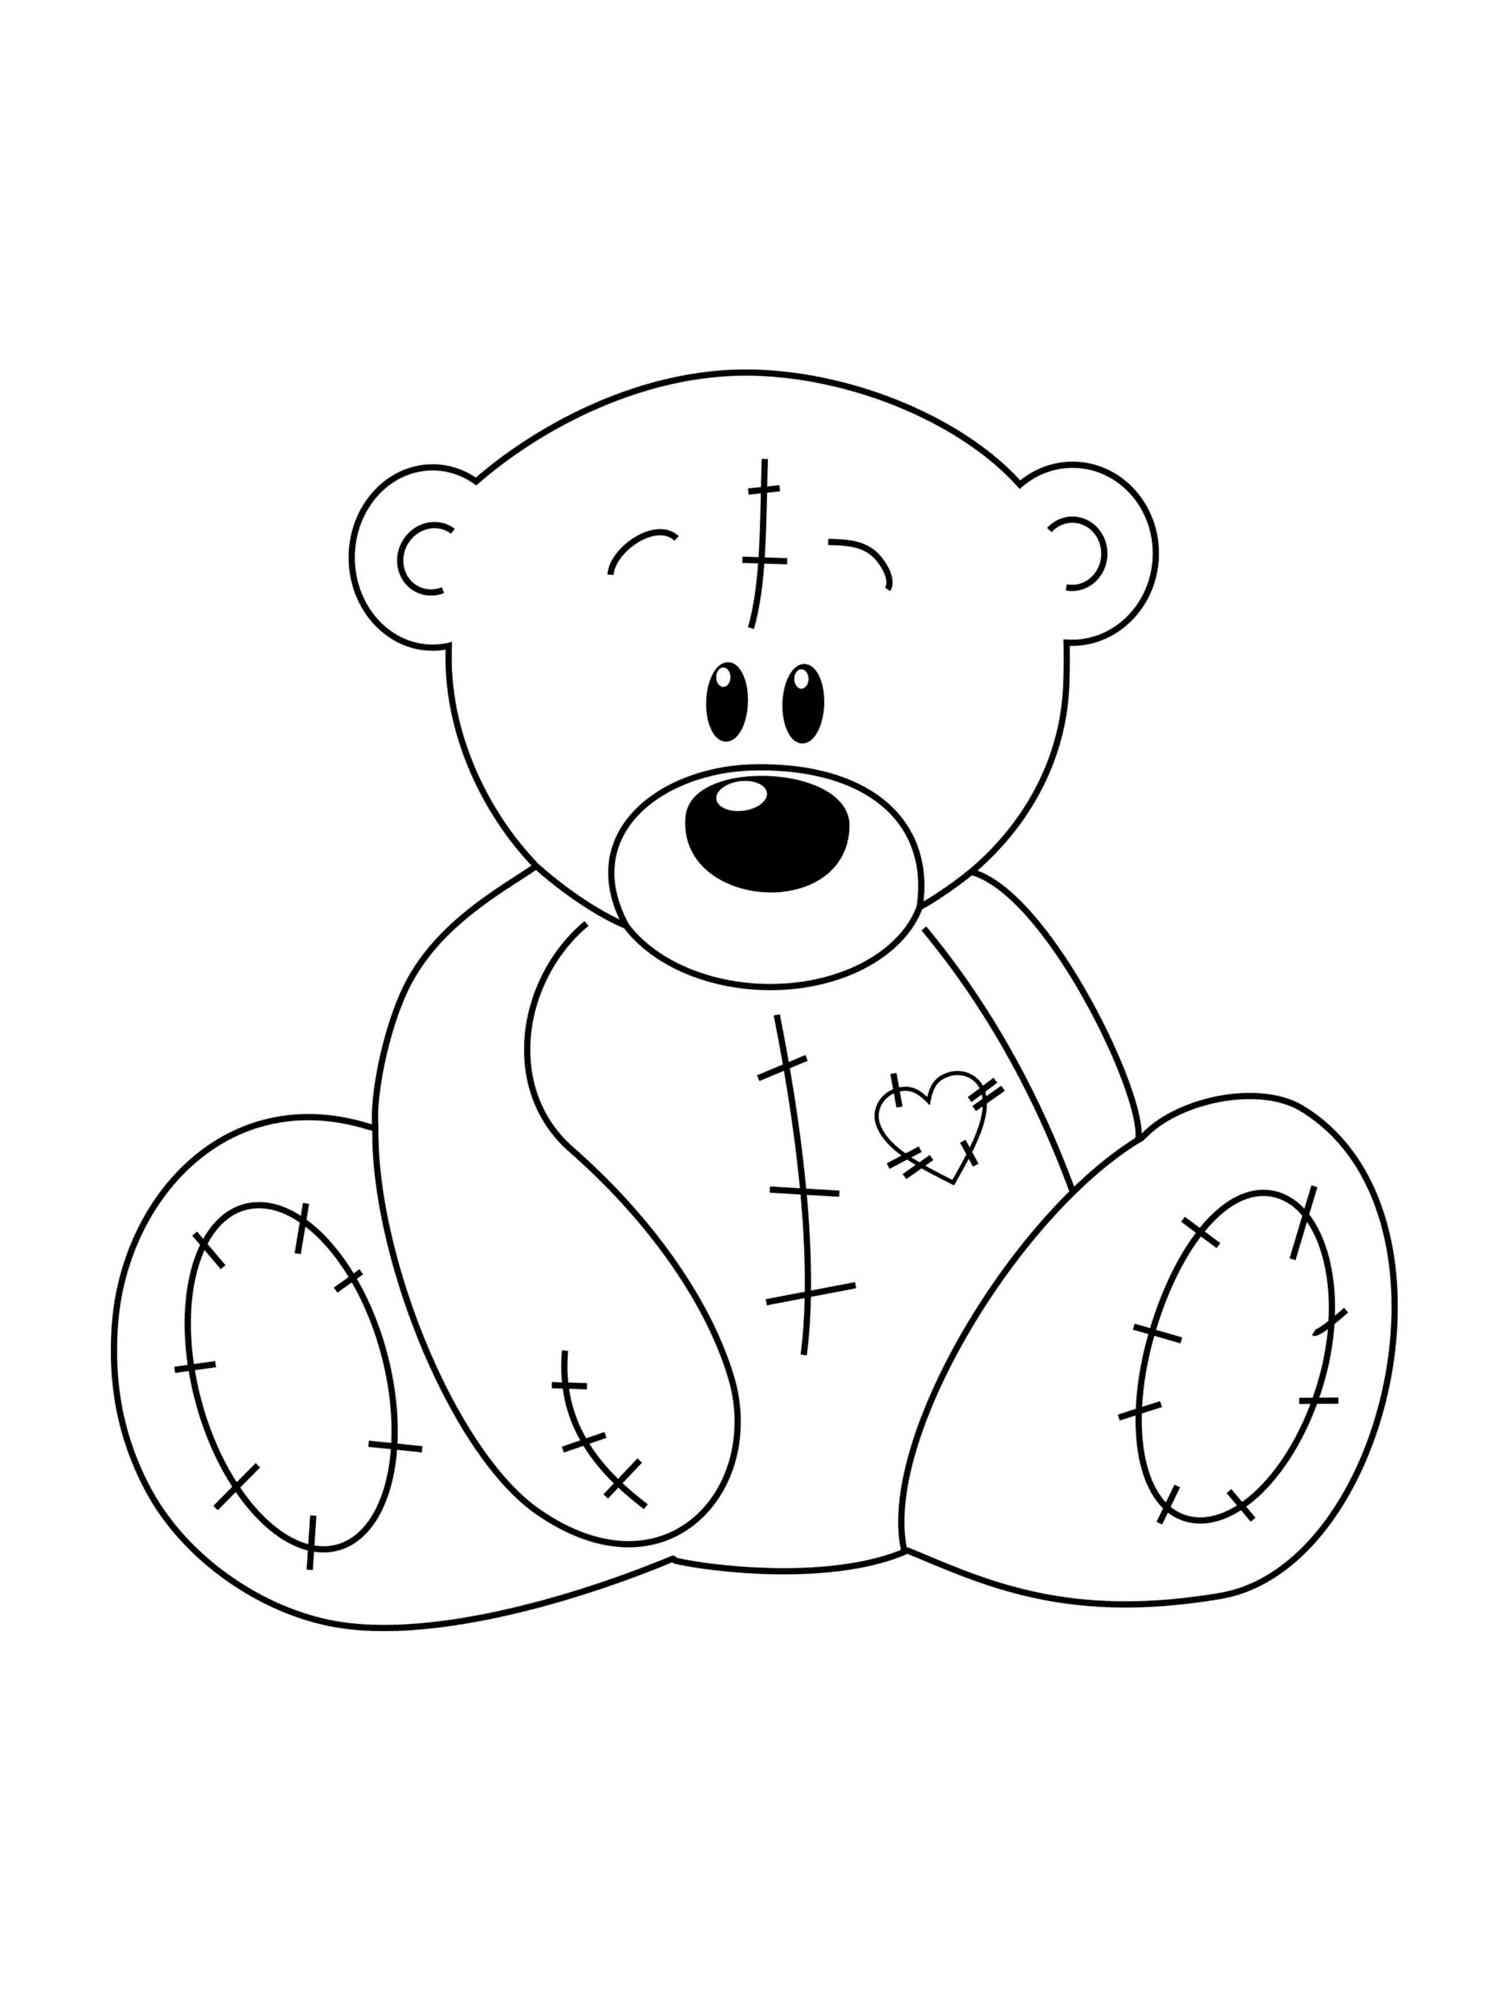 emo teddy bear coloring pages